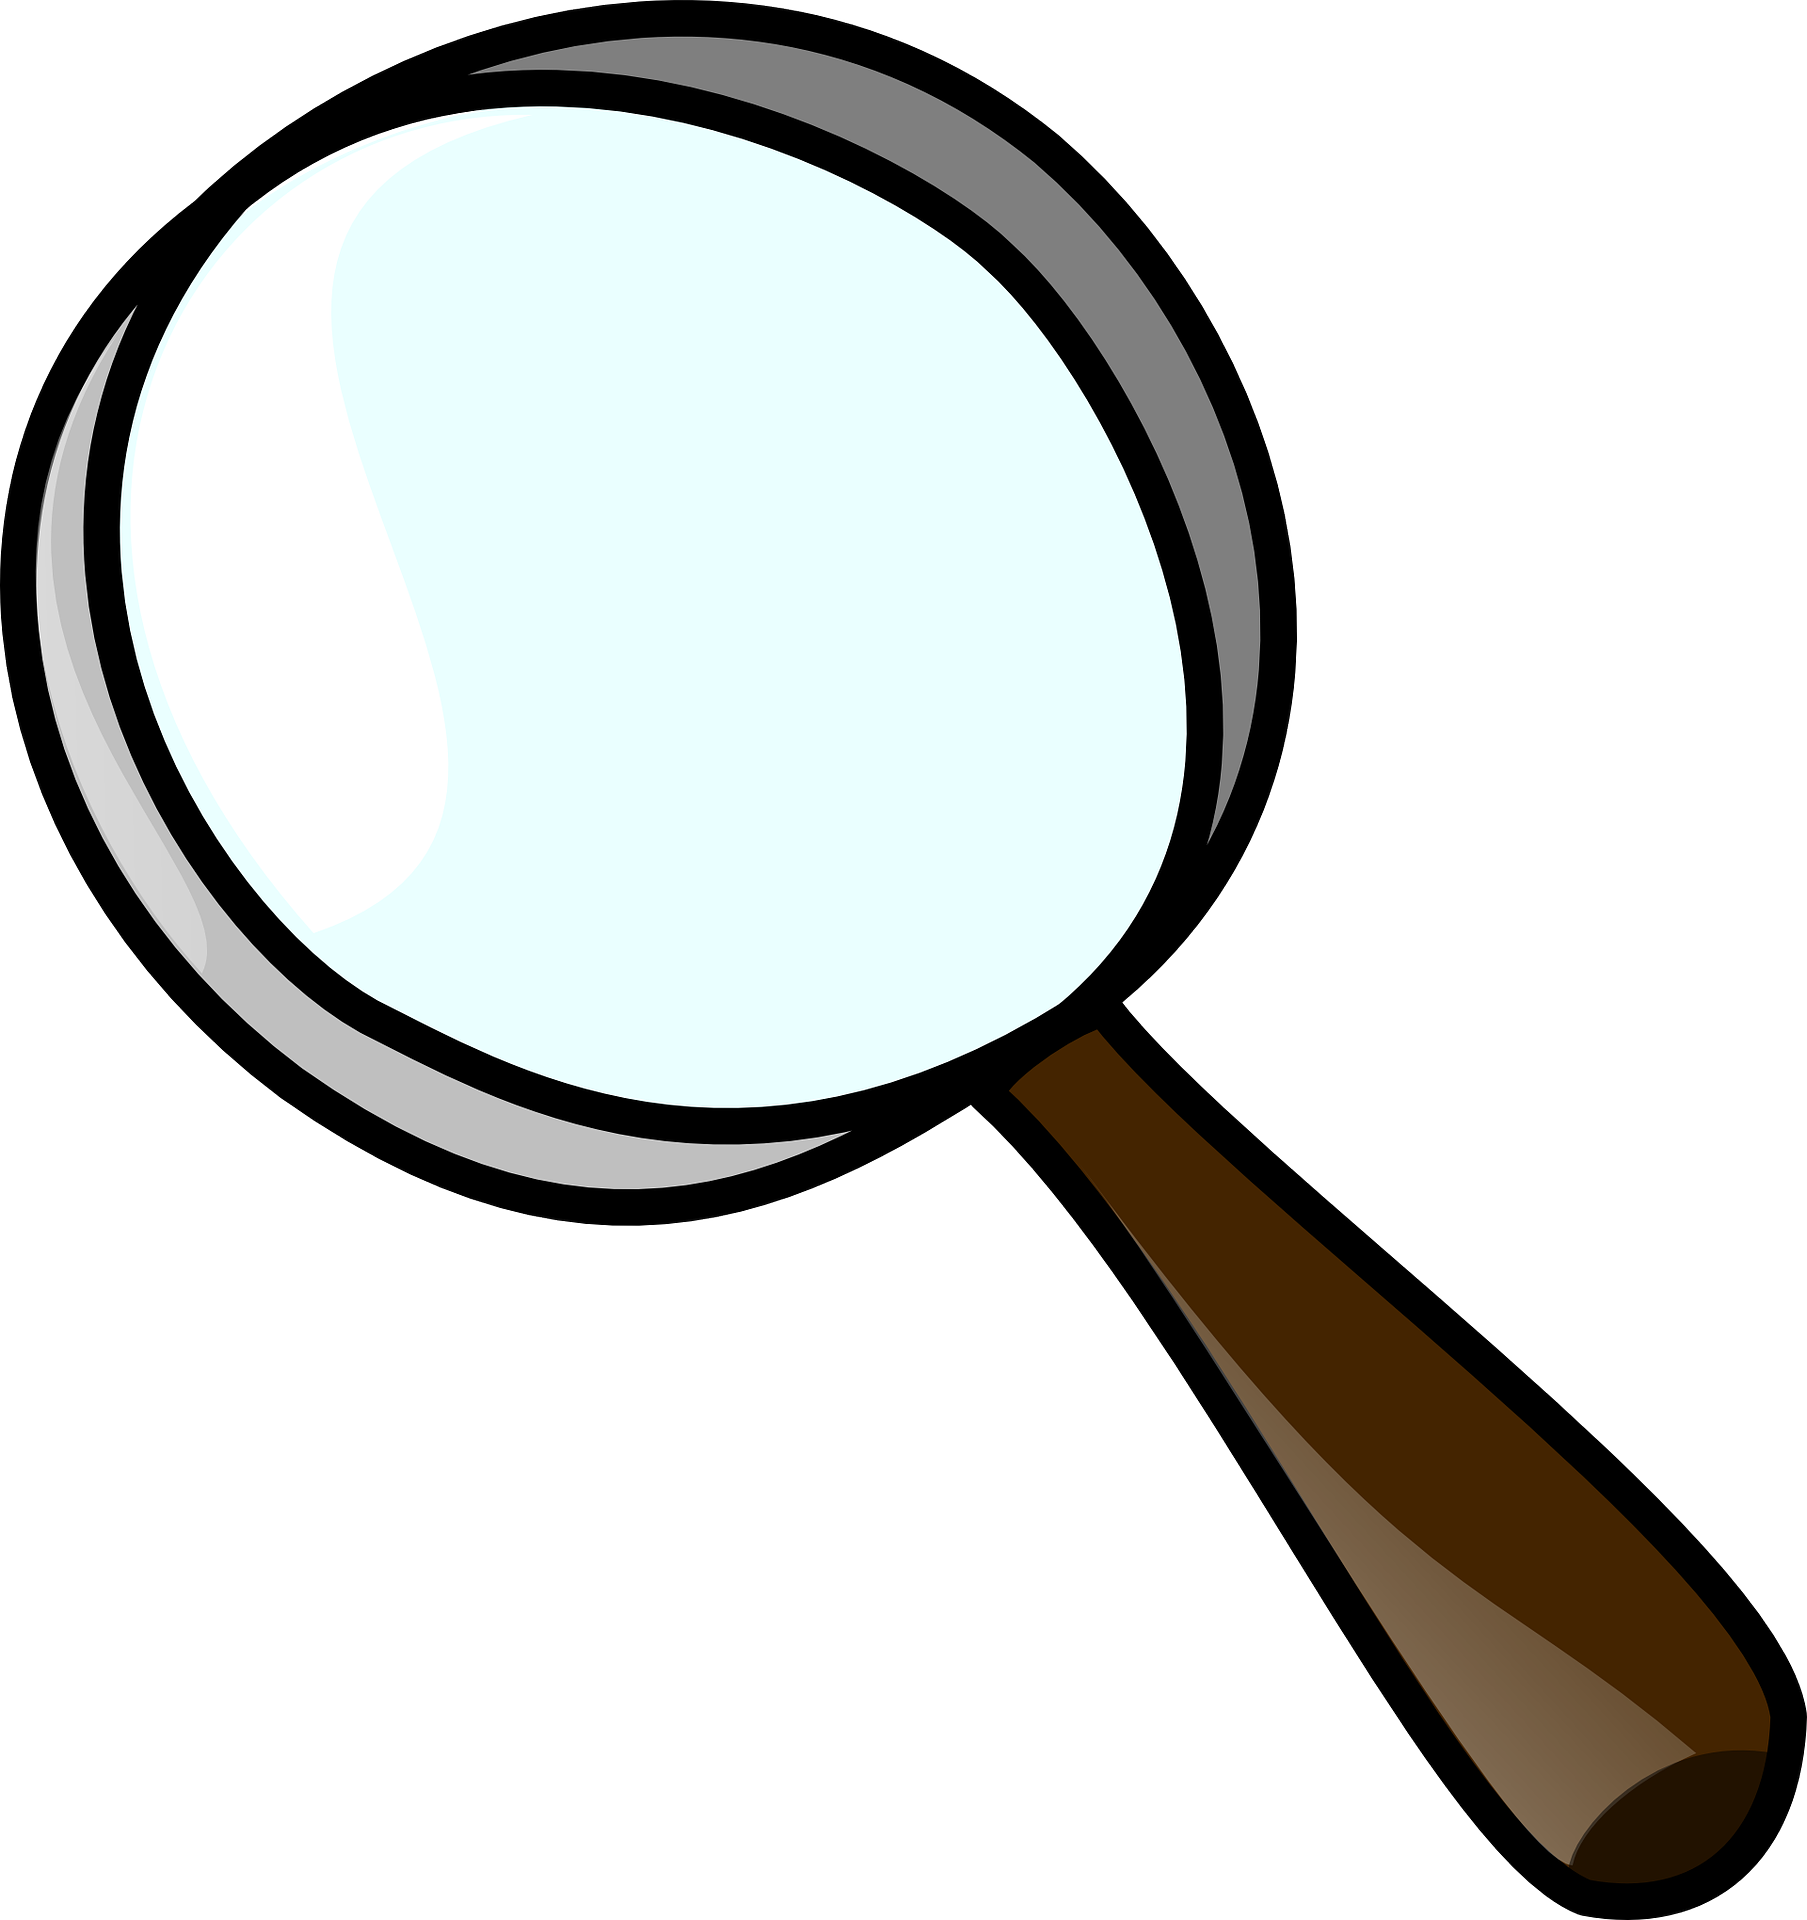 microscope clipart magnifing glass